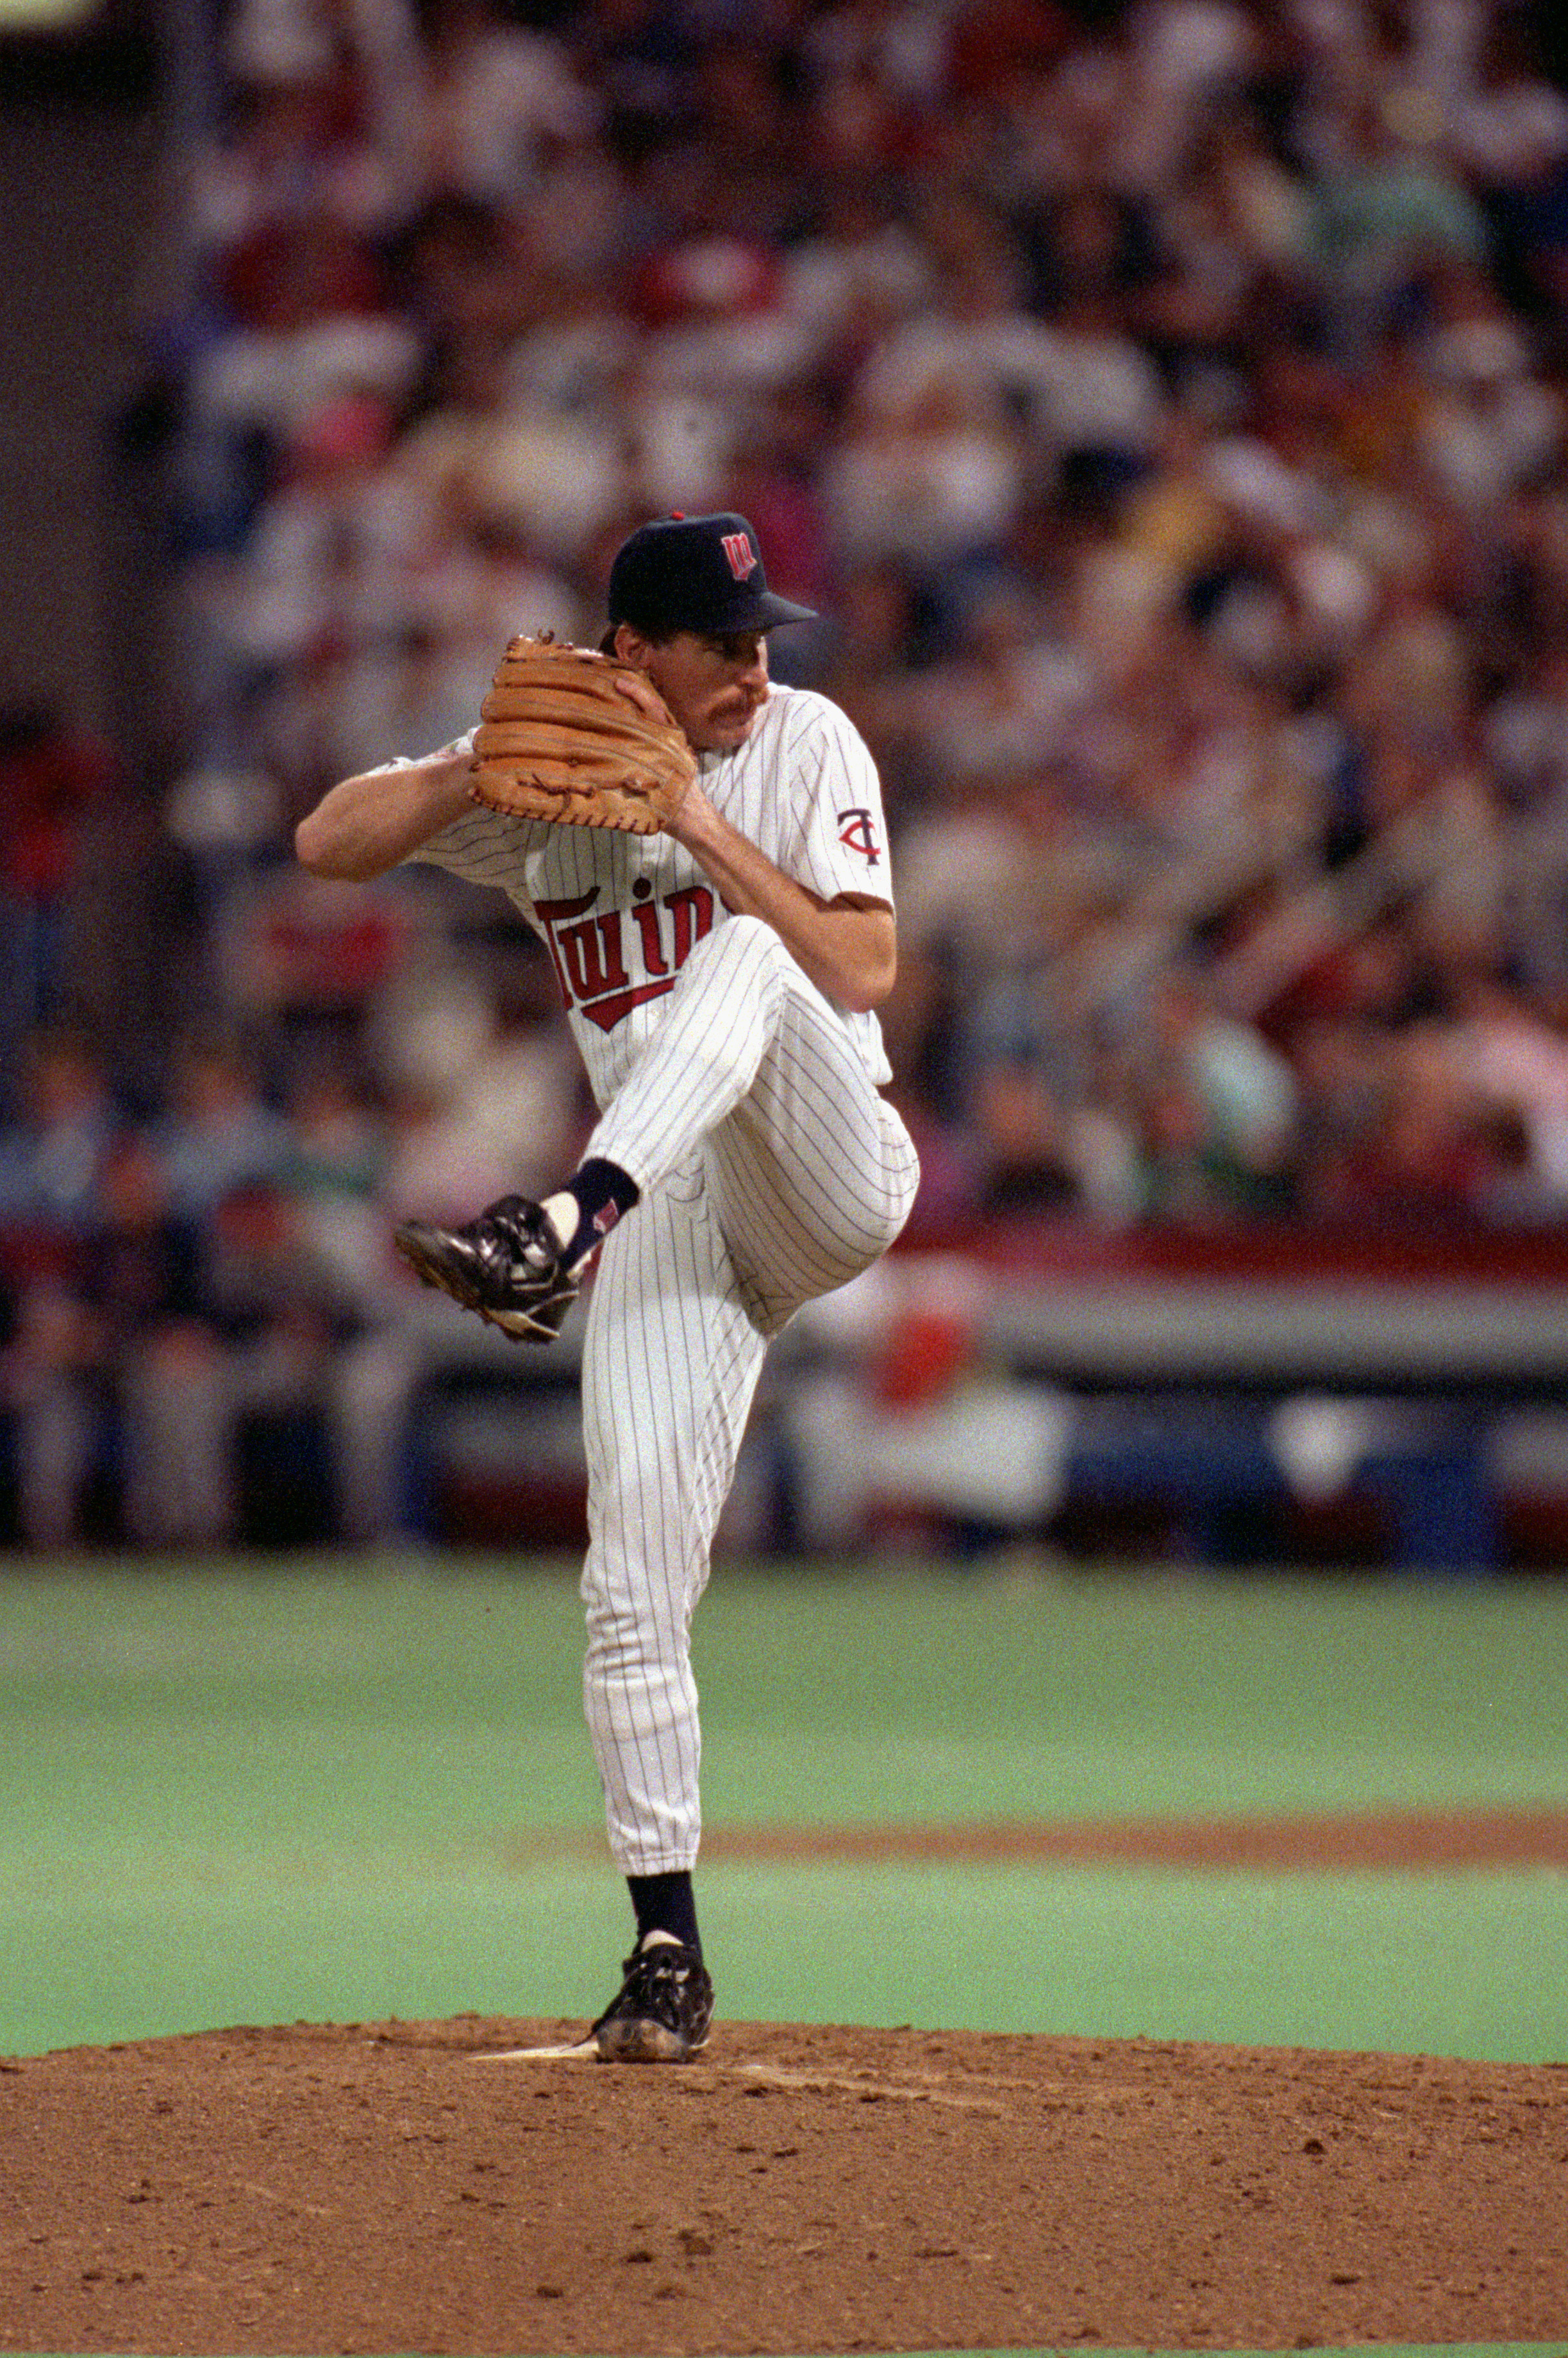 MINNEAPOLIS - OCTOBER 27:  Pitcher Jack Morris #47 of the Minnesota Twins delivers a pitch against the Atlanta Braves at the Metrodome in Minneapolis, Minneapolis, on October 27, 1991. The Twins defeated the Braves 1-0 in game 6, the final game of the 199